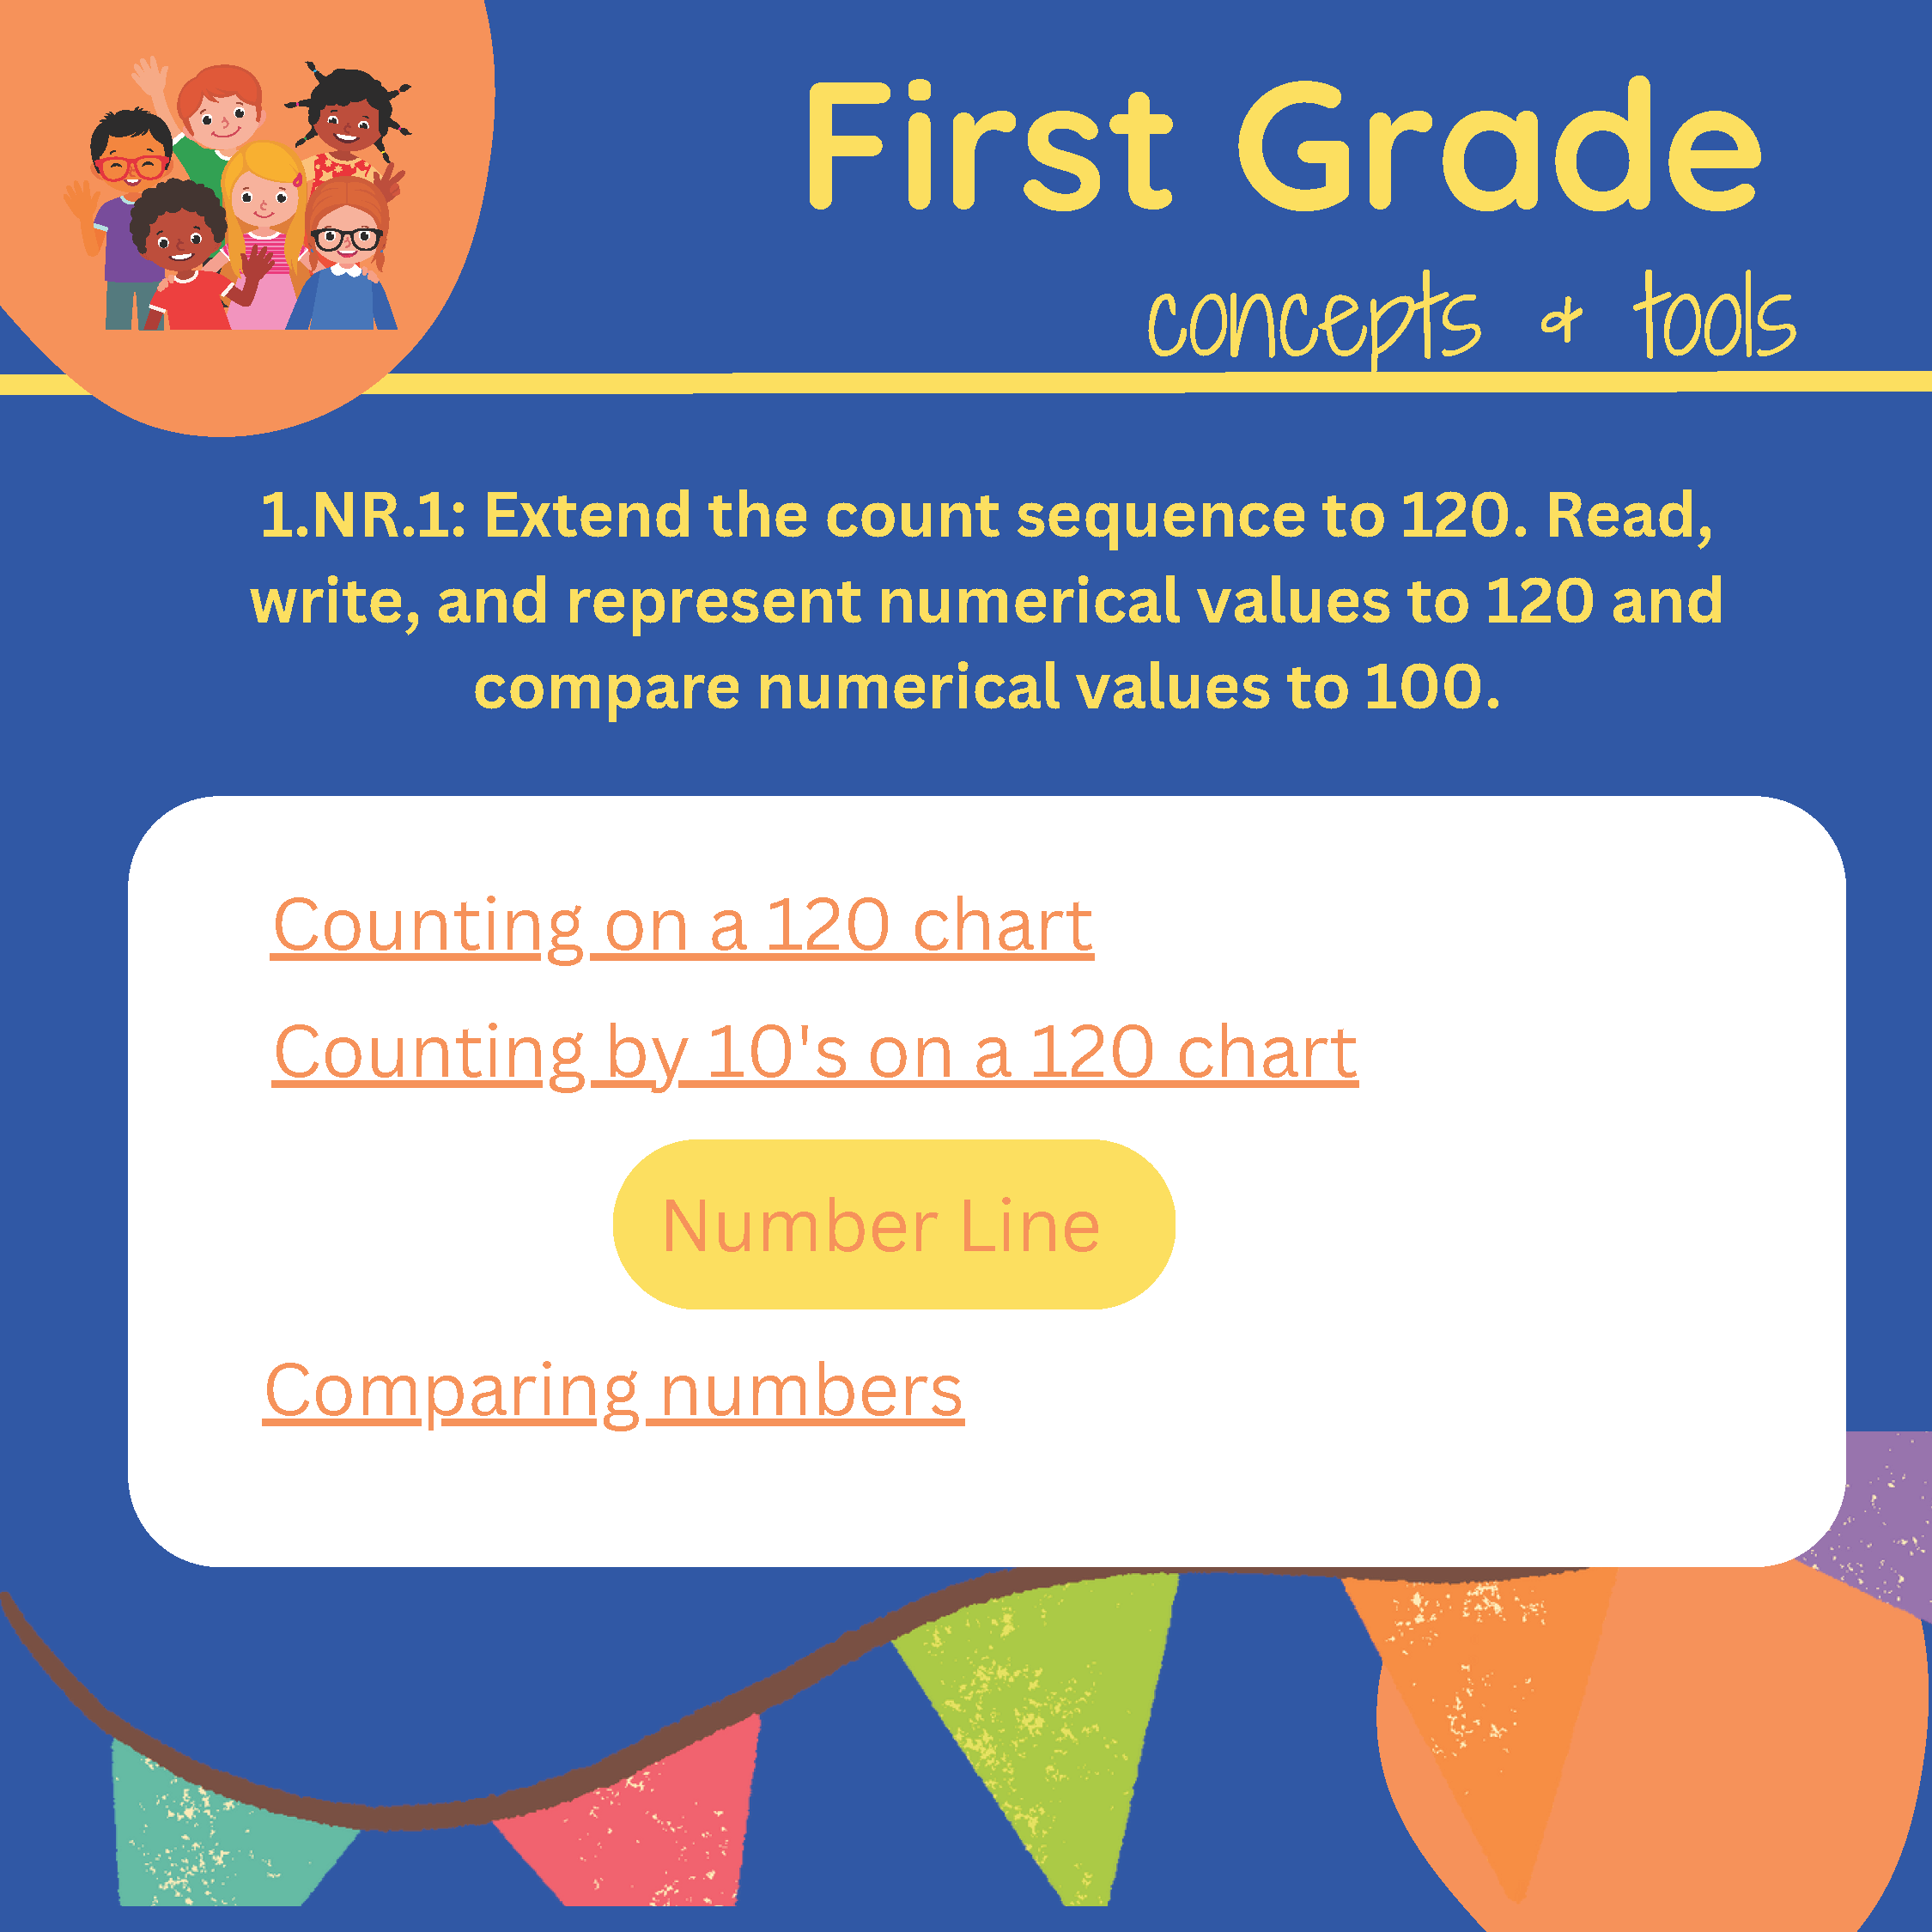 First Grade concepts and tools_Page_1